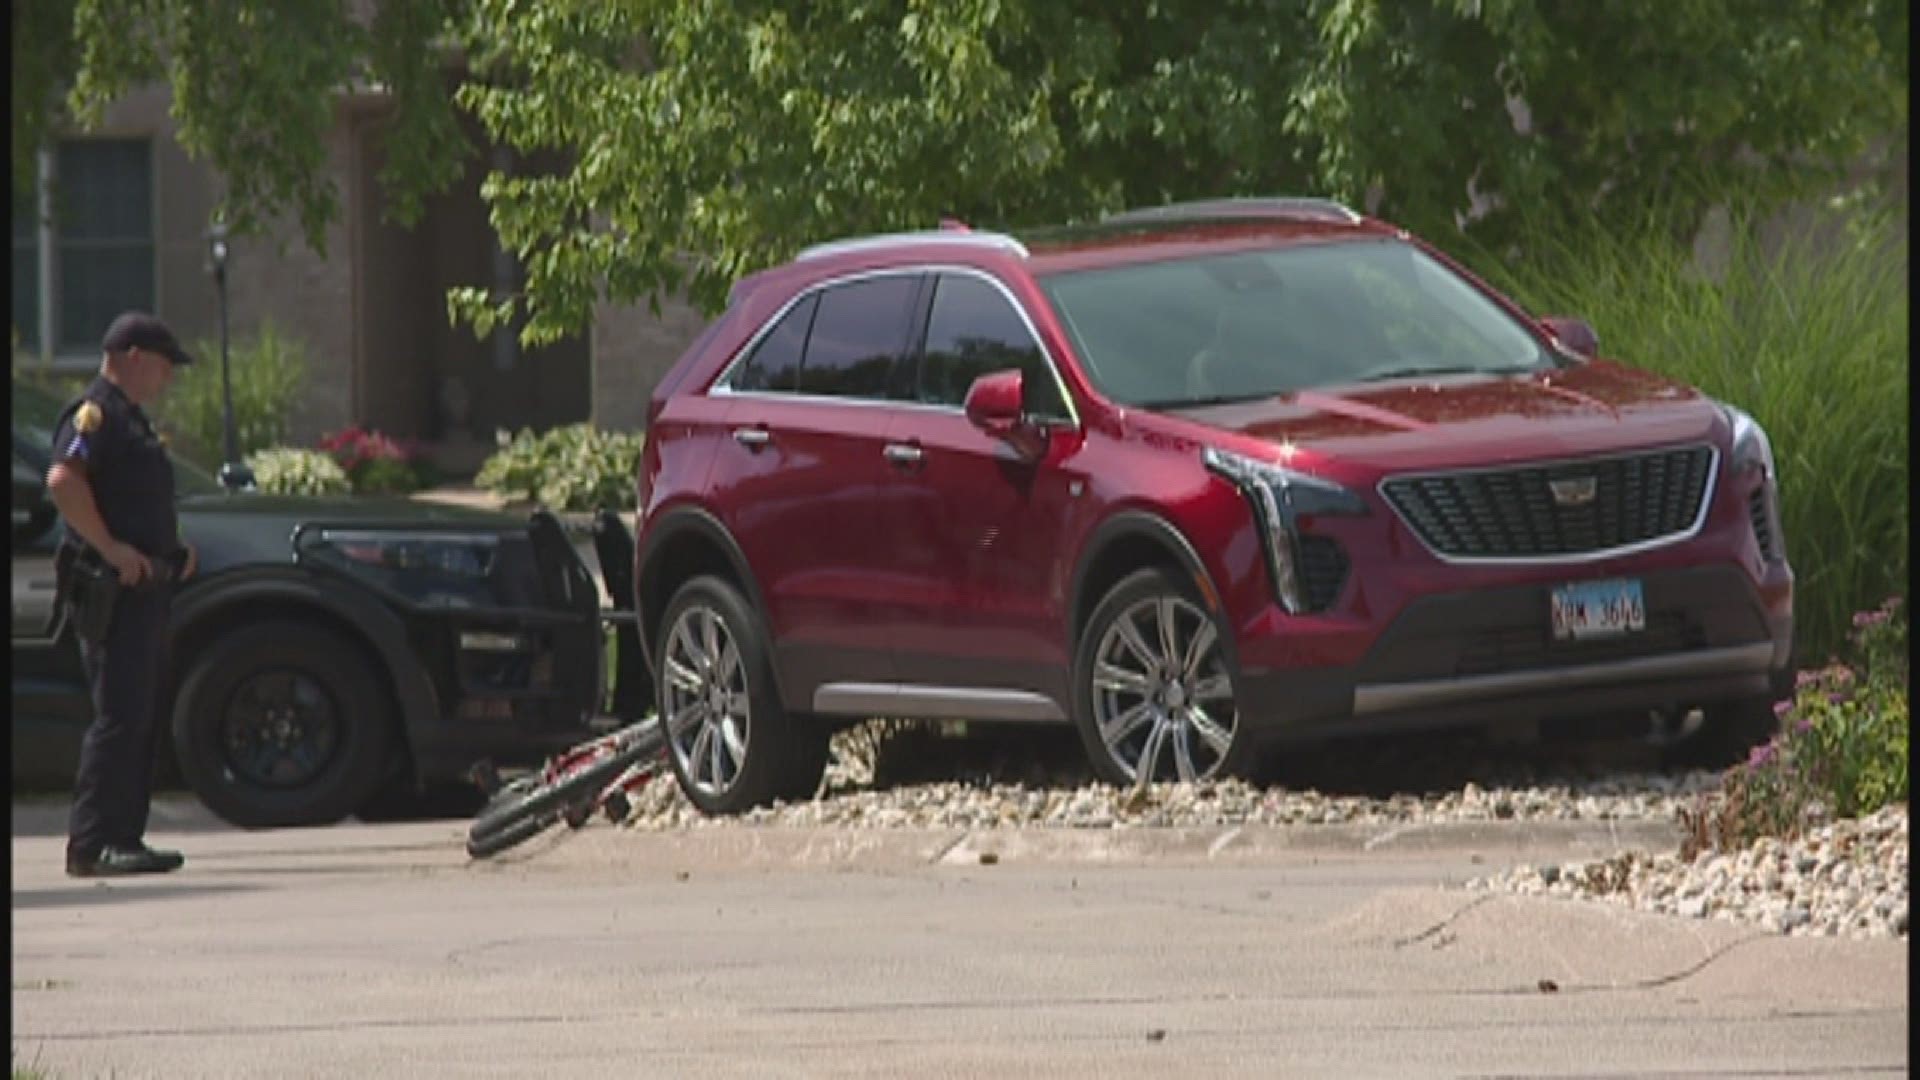 Police received a call around 9:30 a.m. on Thursday, June 17 about a woman trapped under a car.